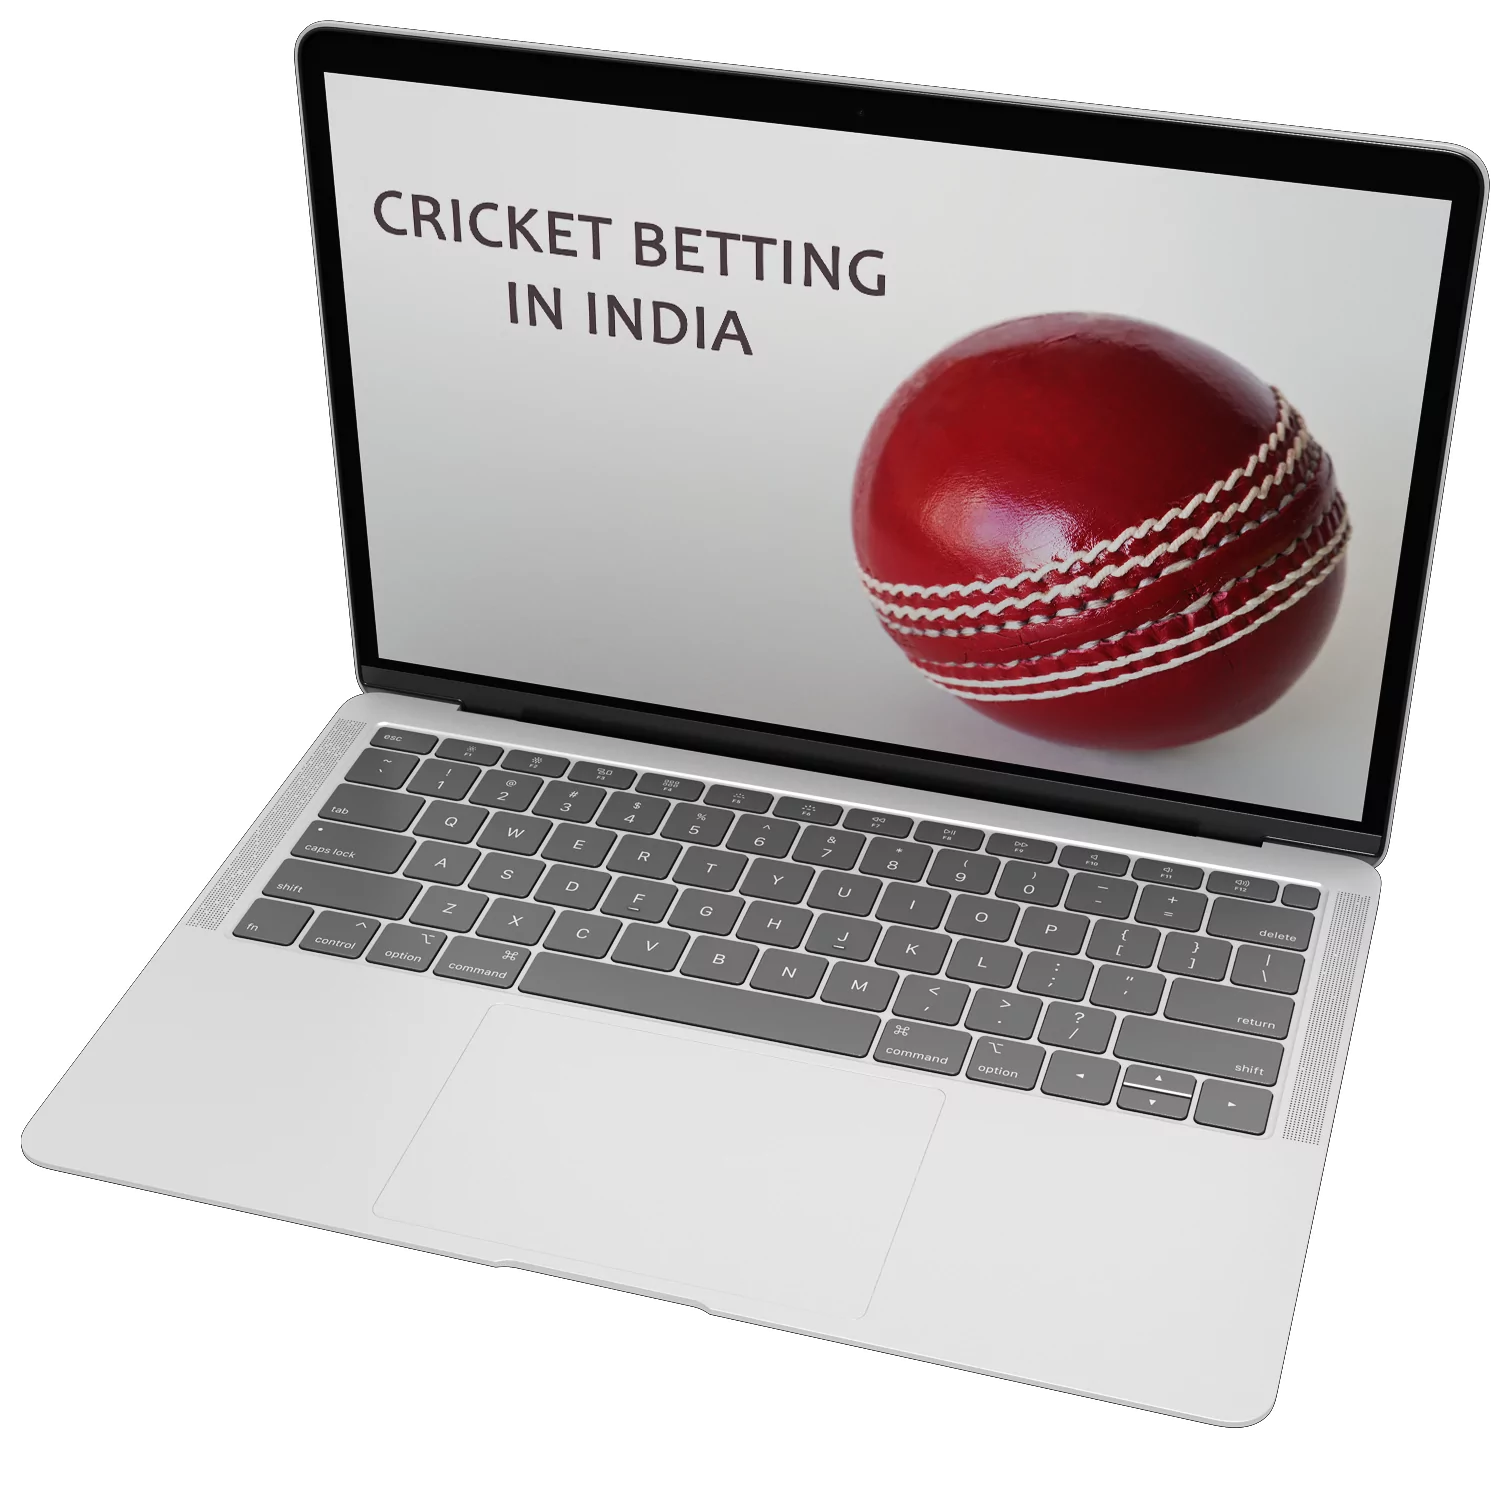 Learn how to bet on cricket online in India.